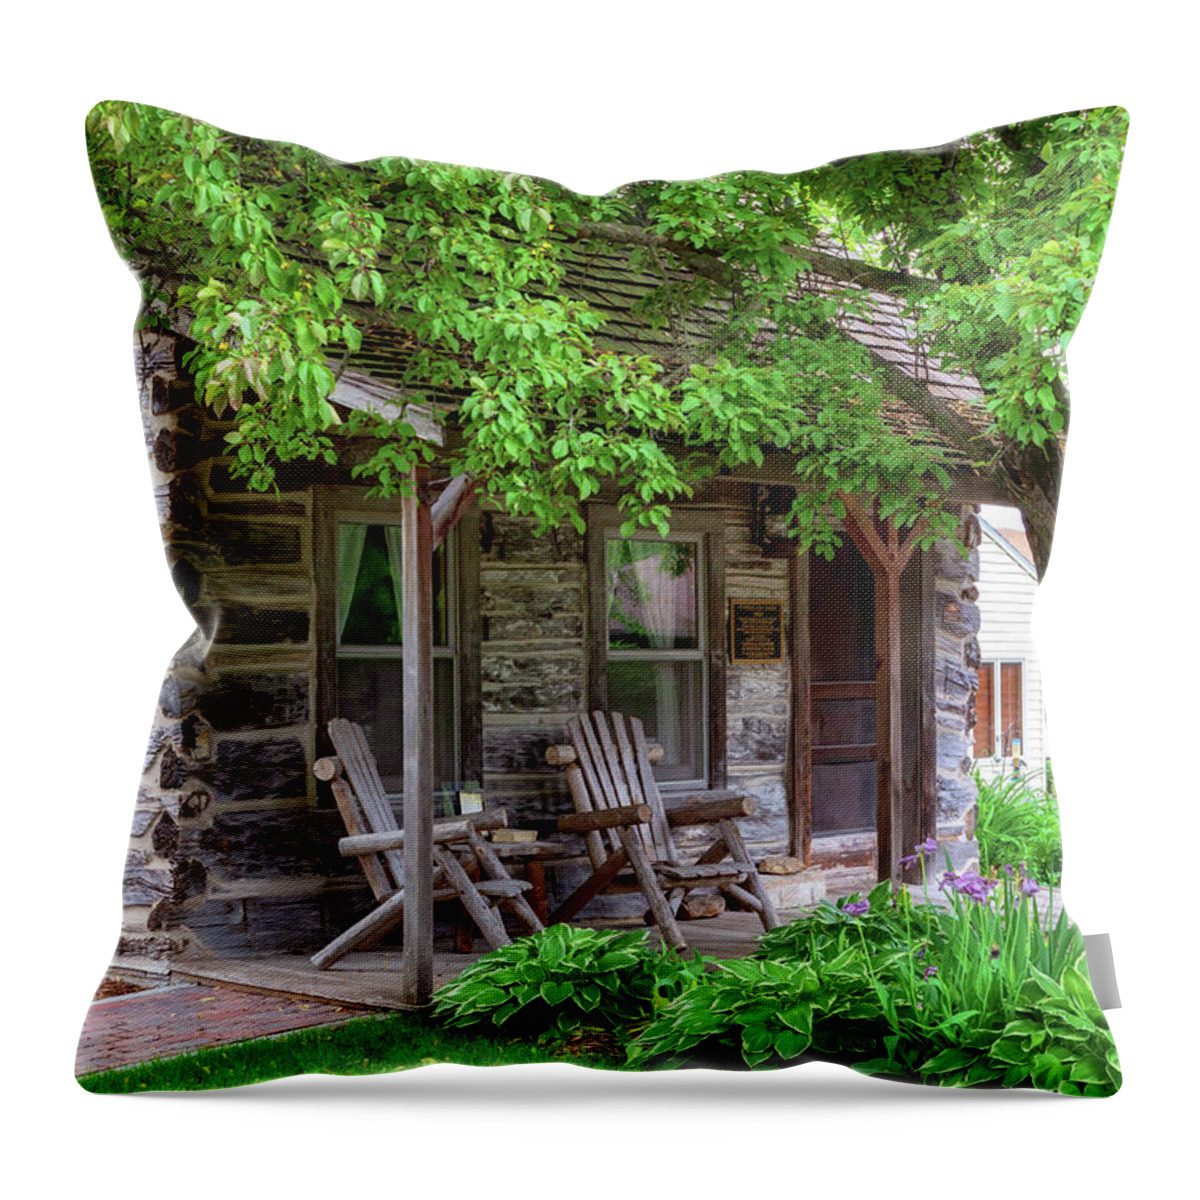 Tuttle Cabin Throw Pillow featuring the photograph Tuttle Home - Pella Iowa by Susan Rissi Tregoning